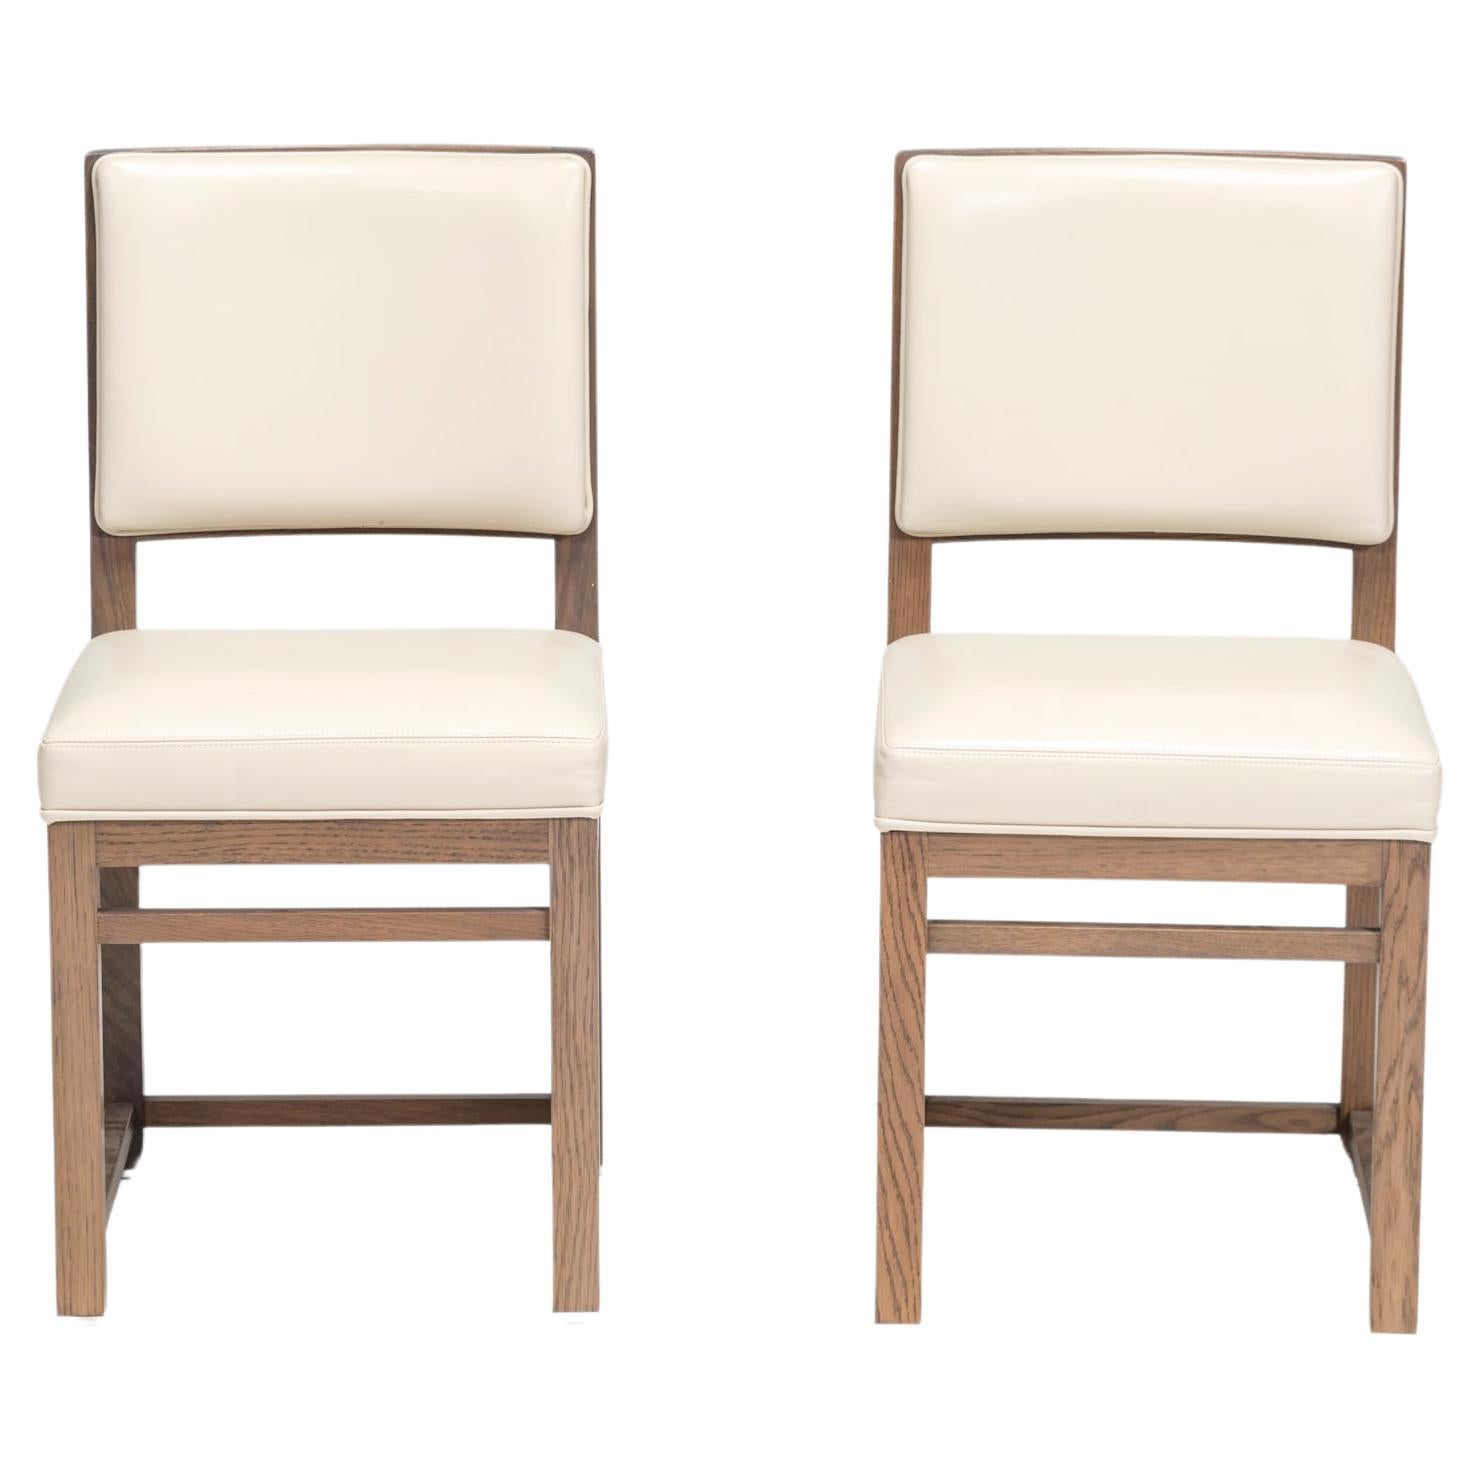 Antonio Citterio for Maxalto Musa Oak & Leather Dining Chairs, Set of 2 For Sale